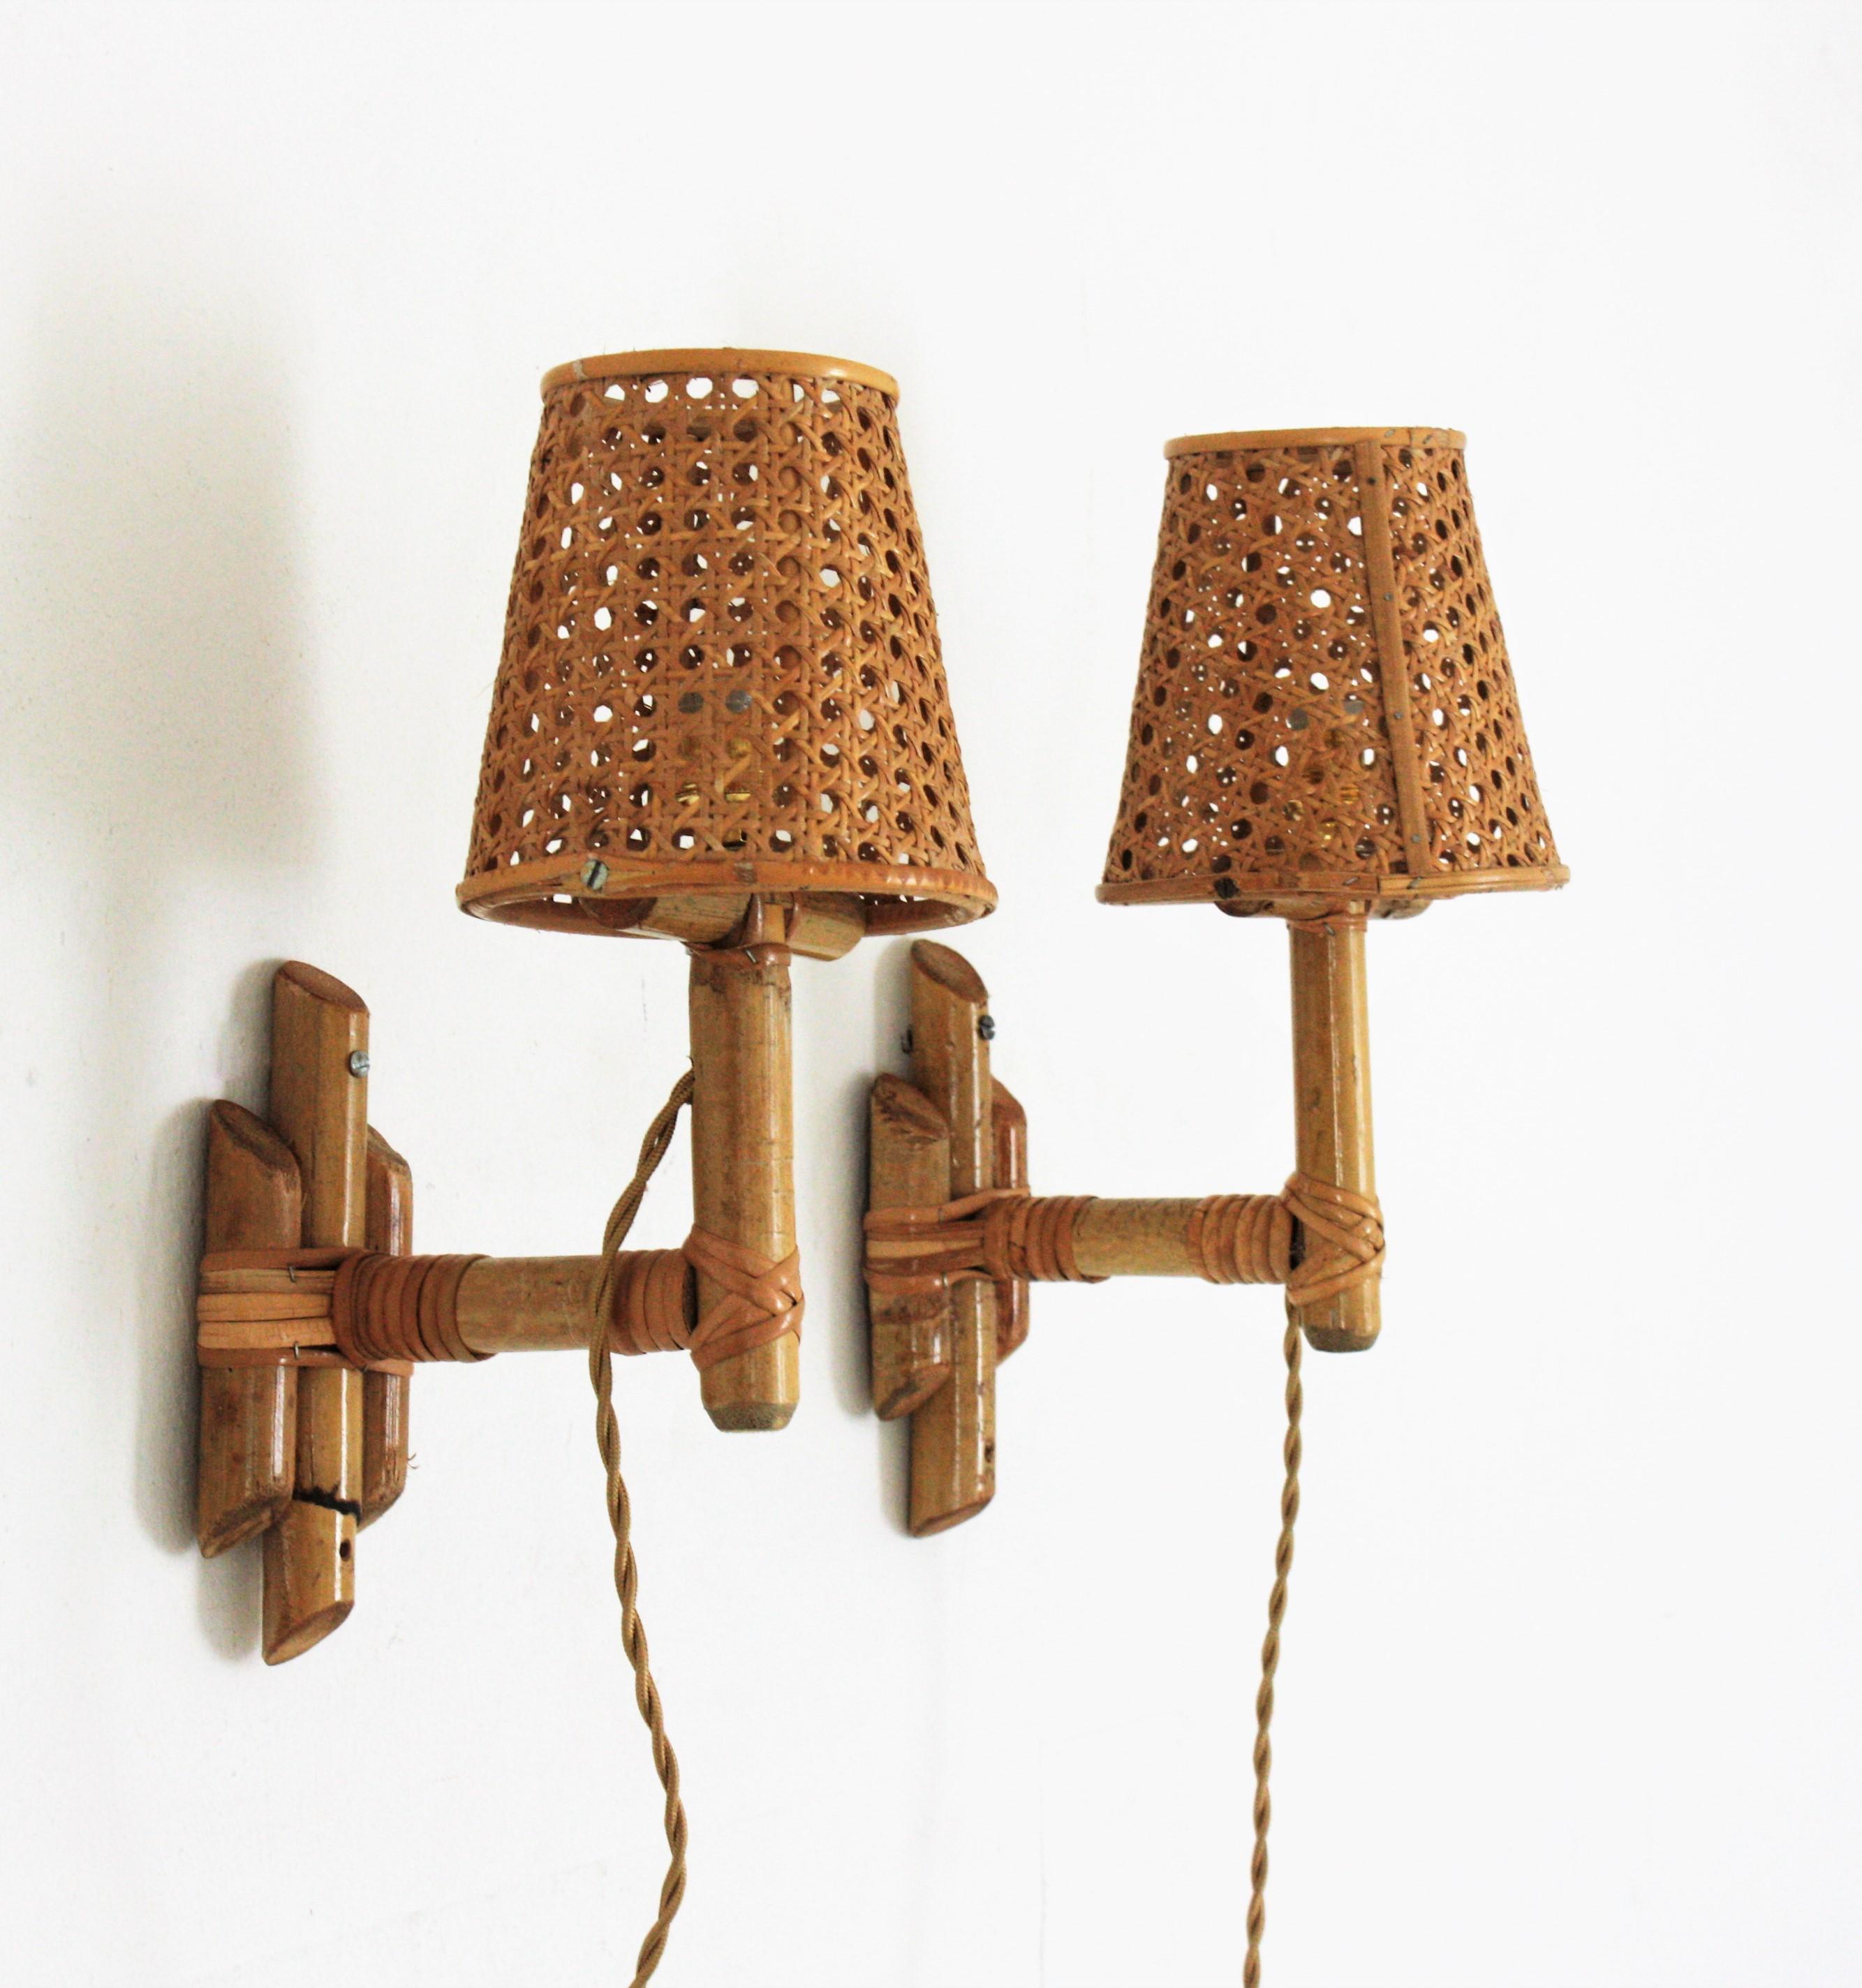 Hand-Crafted Pair of Italian Modern Woven Wicker Rattan and Bamboo Wall Lights with Shades For Sale